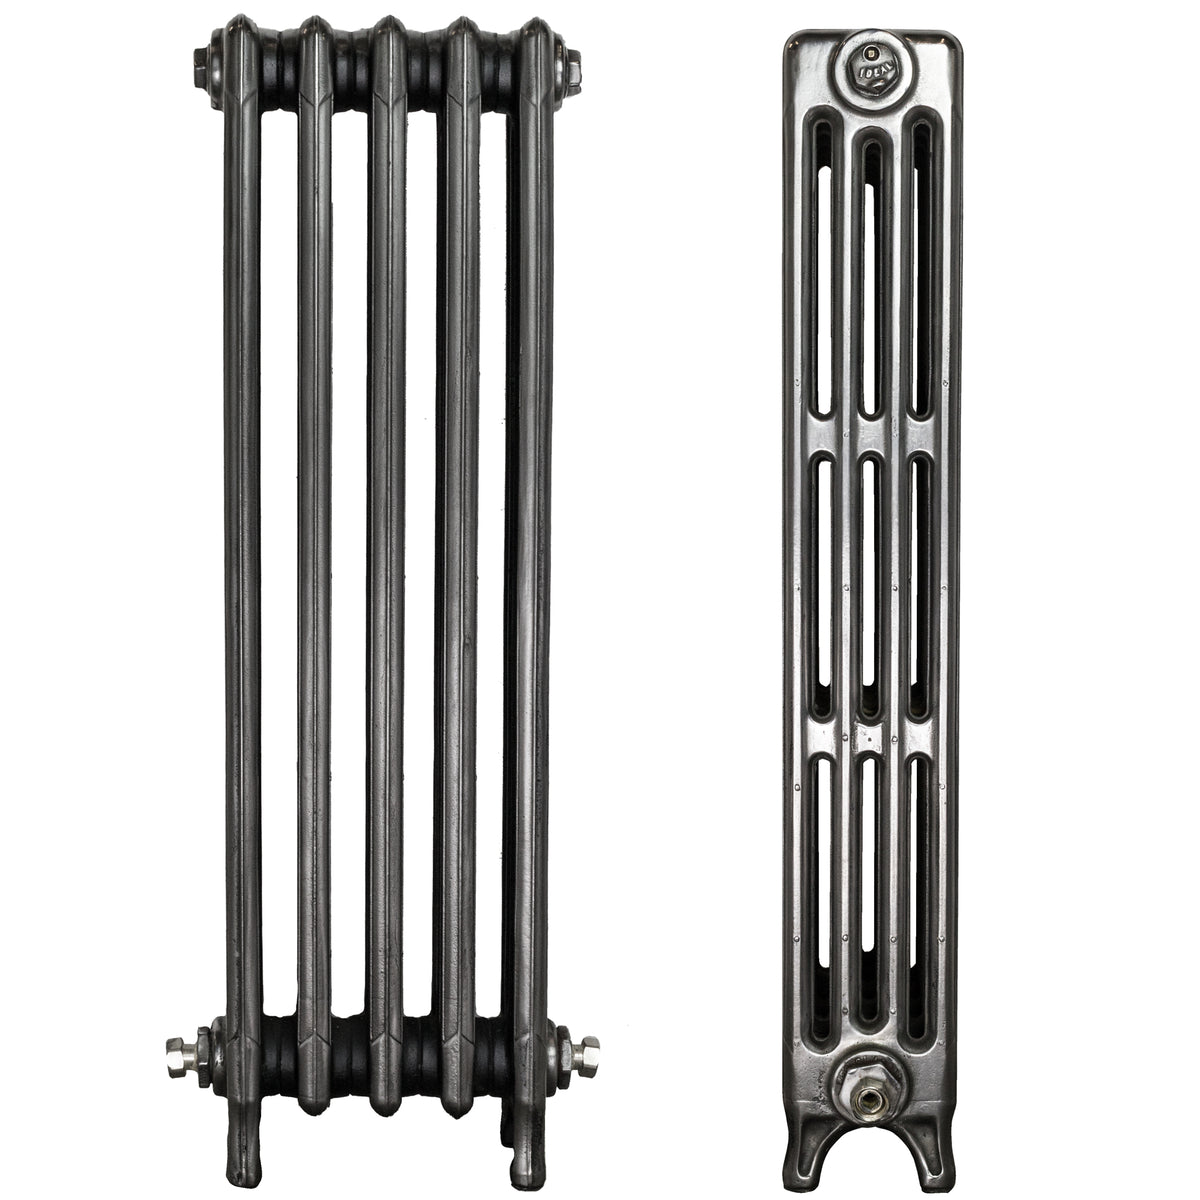 Fully Restored Ideal Cast Iron Radiator 4 Column 5 Section (92cm tall) | The Architectural Forum